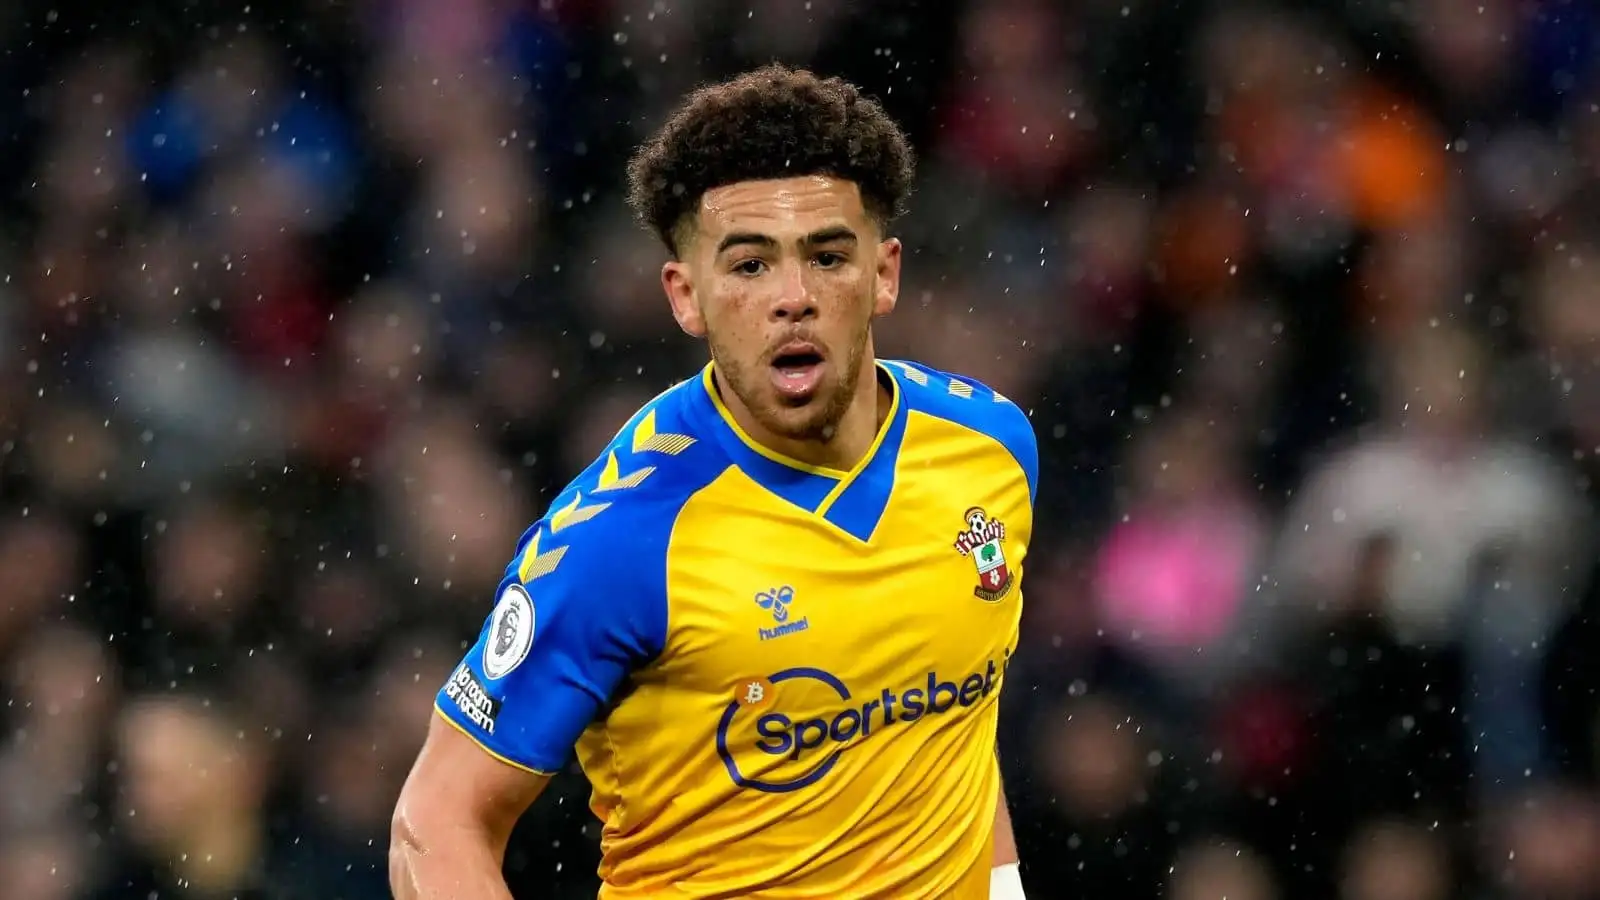 Che Adams of Southampton during the Premier League match against Manchester United at Old Trafford